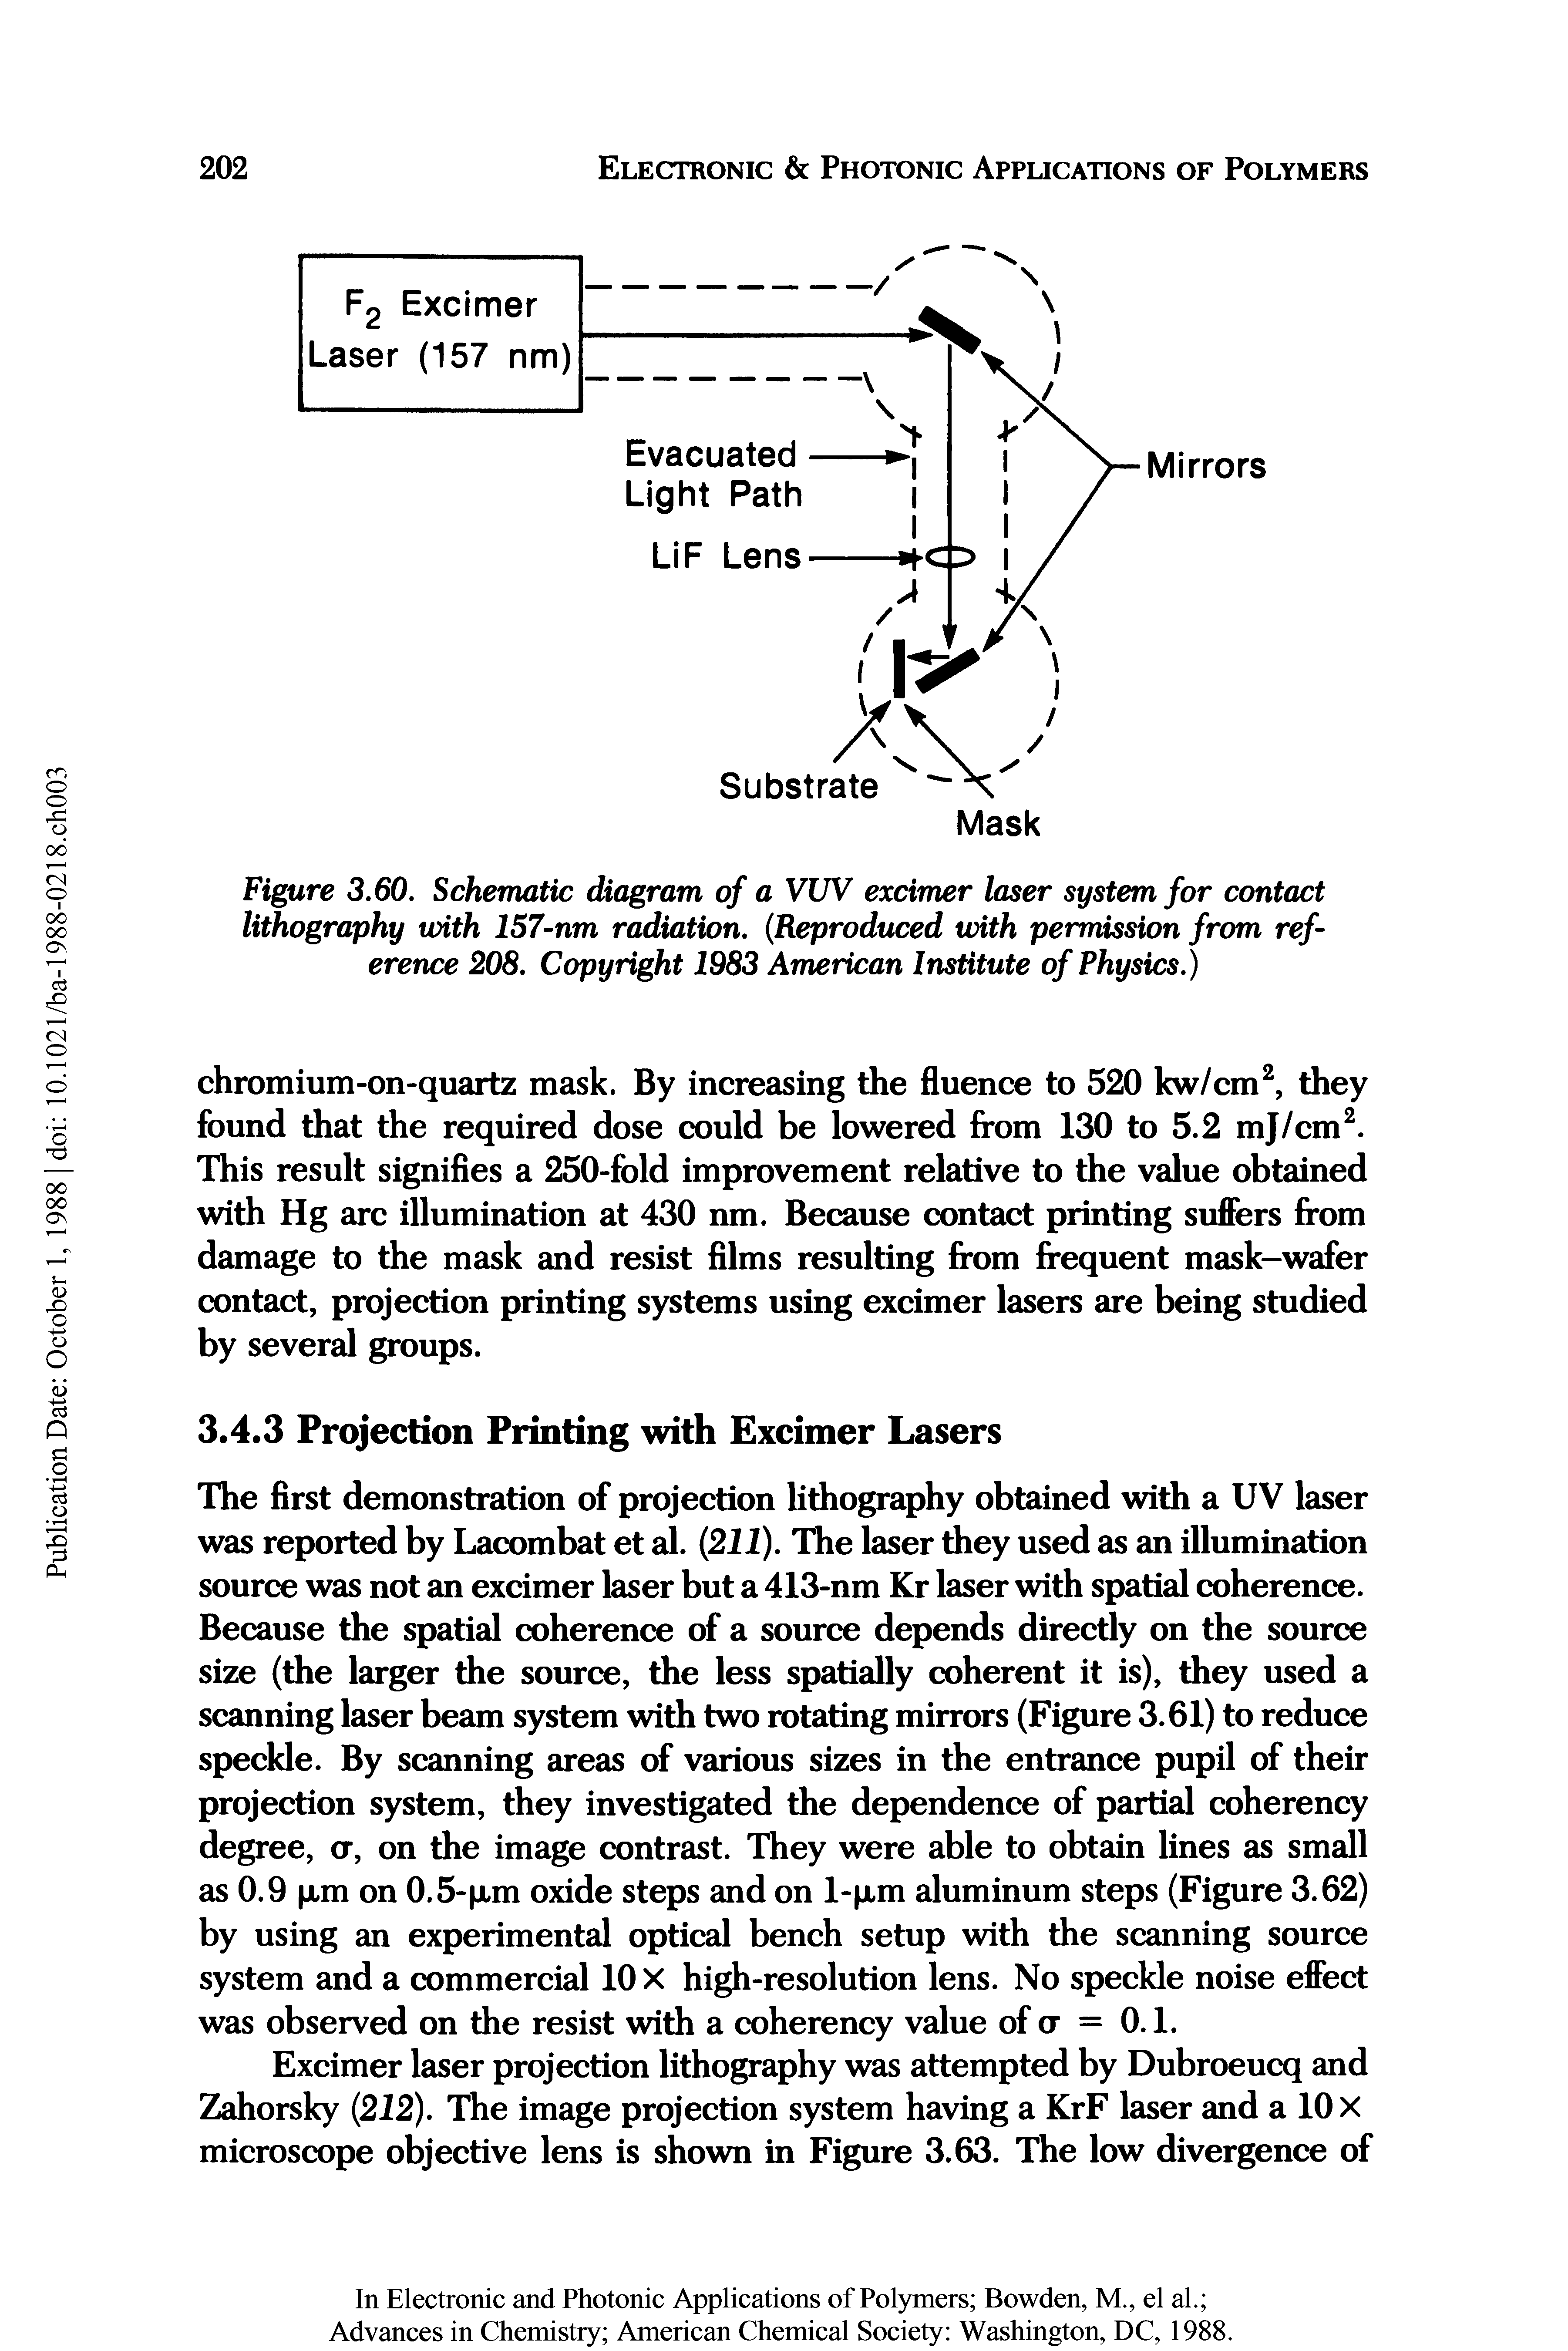 Figure 3.60. Schematic diagram of a VUV excimer laser system for contact lithography with 157-nm radiation. (Reproduced with permission from reference 208. Copyright 1983 American Institute of Physics.)...